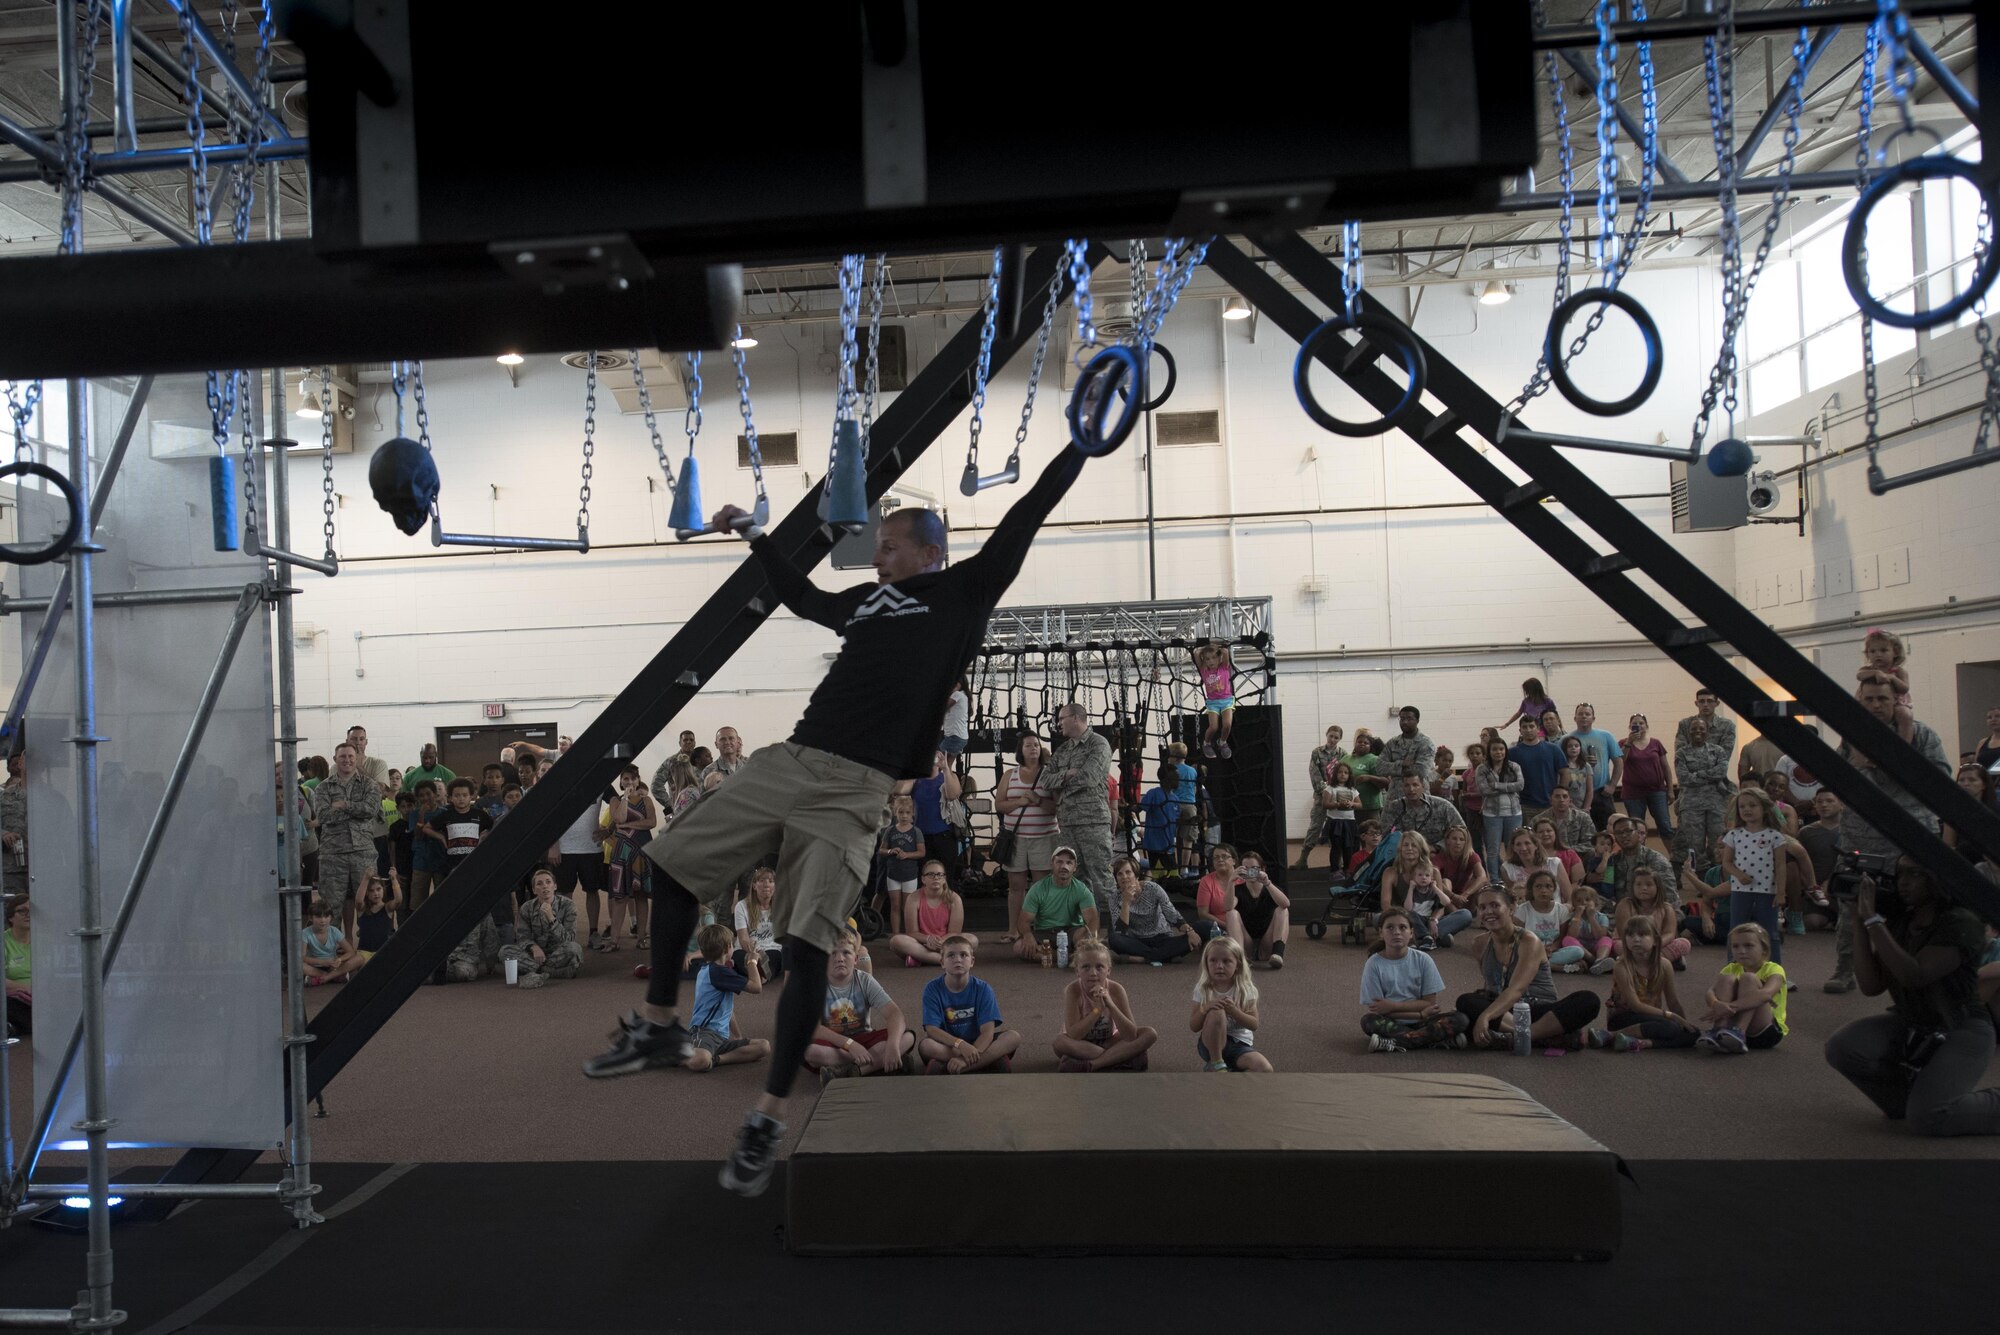 Brent Steffensen, Alpha Warrior team member, swings through the Alpha Warrior obstacle course, April 26, 2017, at Moody Air Force Base, Ga. The Air Force Services Activity partnered with the Alpha Warrior team to promote Comprehensive Airman Fitness. Winners earned an opportunity to compete in an Air Force-wide Alpha Warrior championship.  (U.S. Air Force photo by Airman 1st Class Daniel Snider)